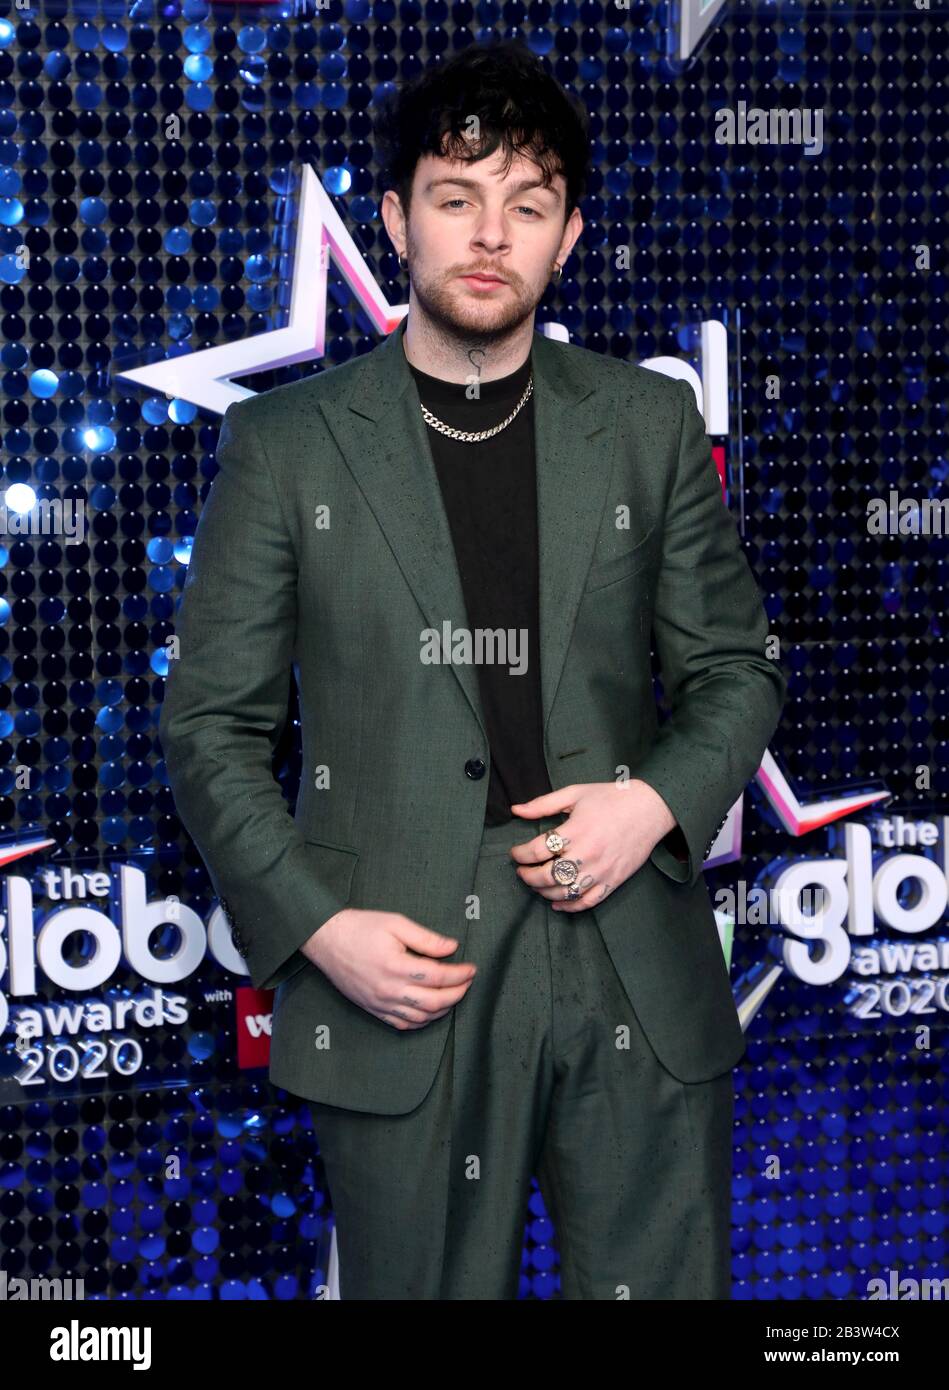 Tom Grennan attends The Global Awards 2020 with Very.co.uk at London's Eventim Apollo Hammersmith. Stock Photo